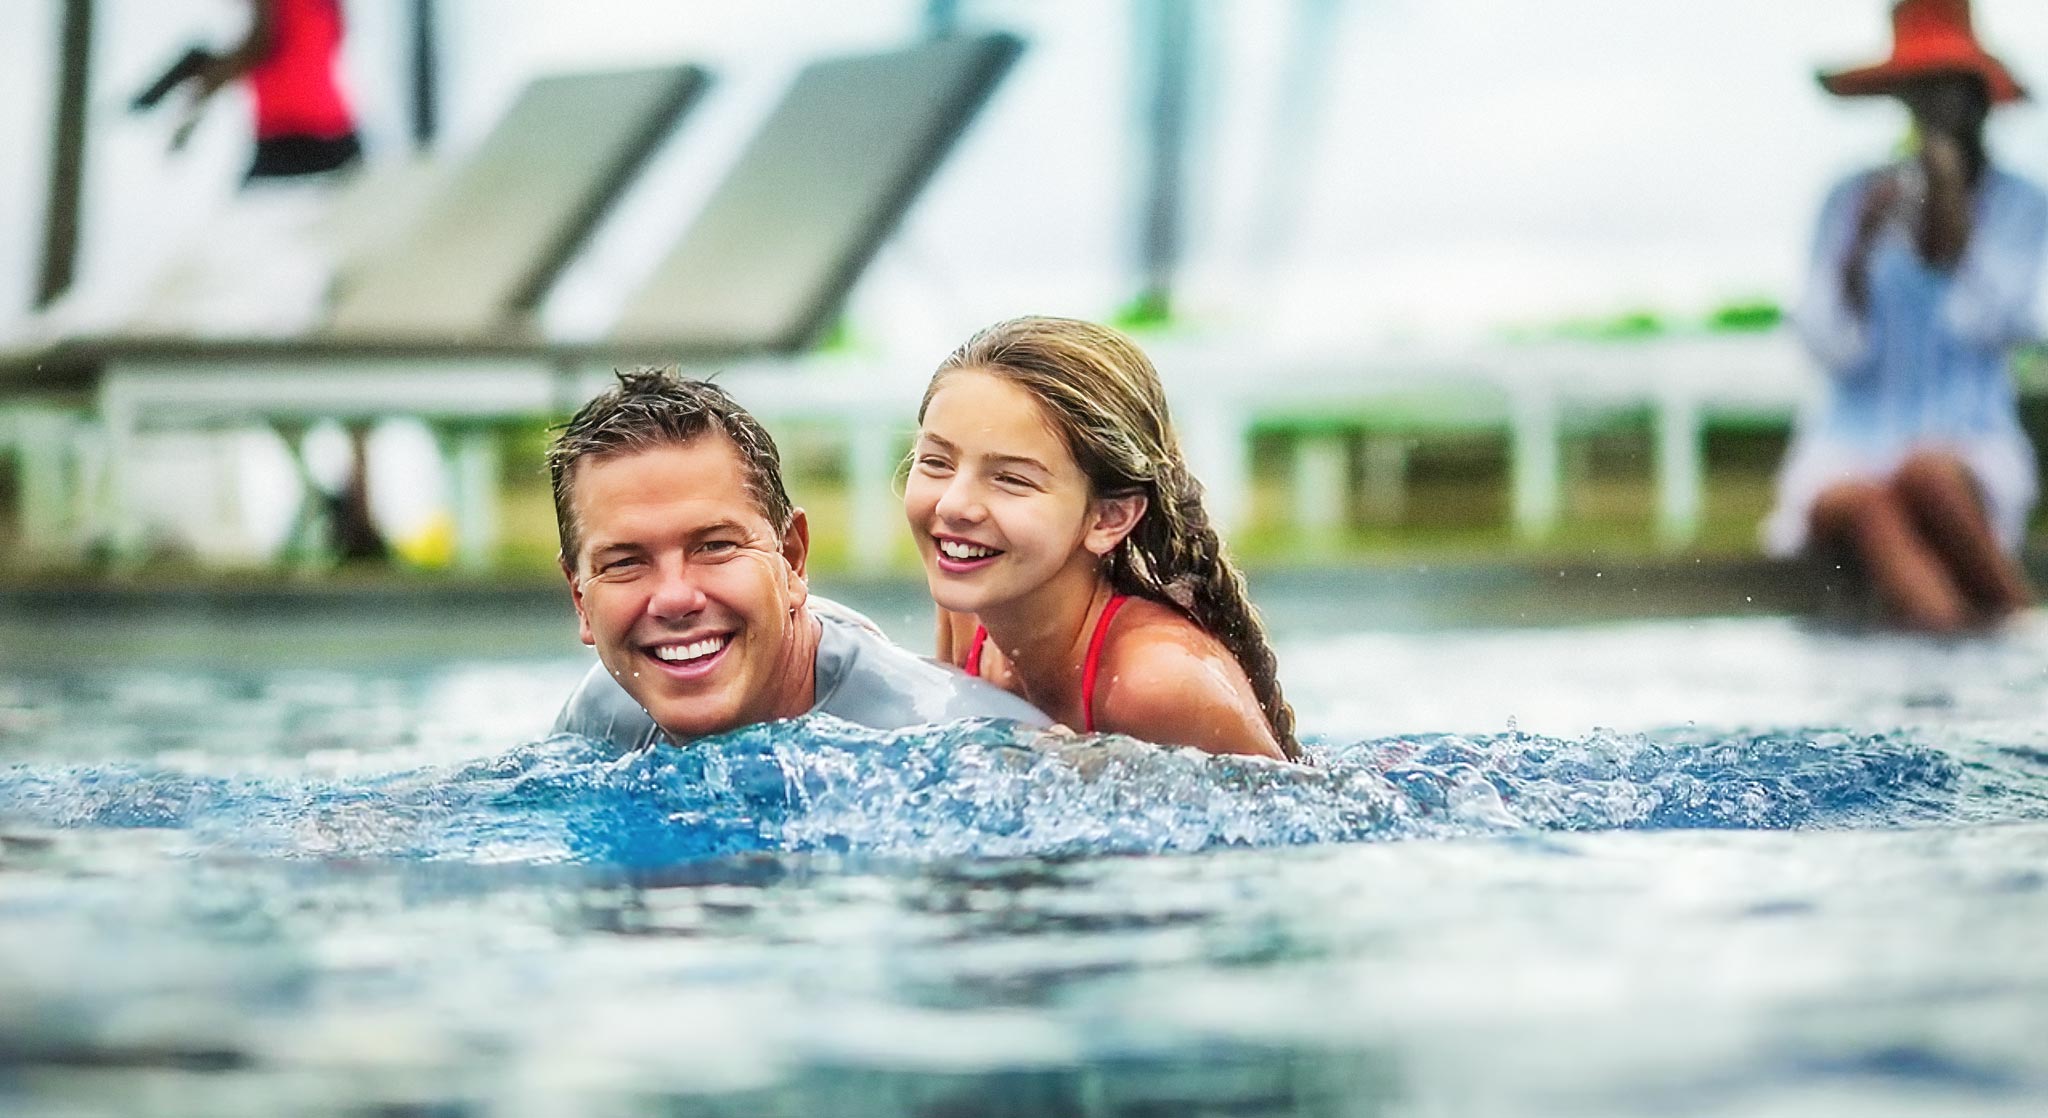 father-daughter-pool